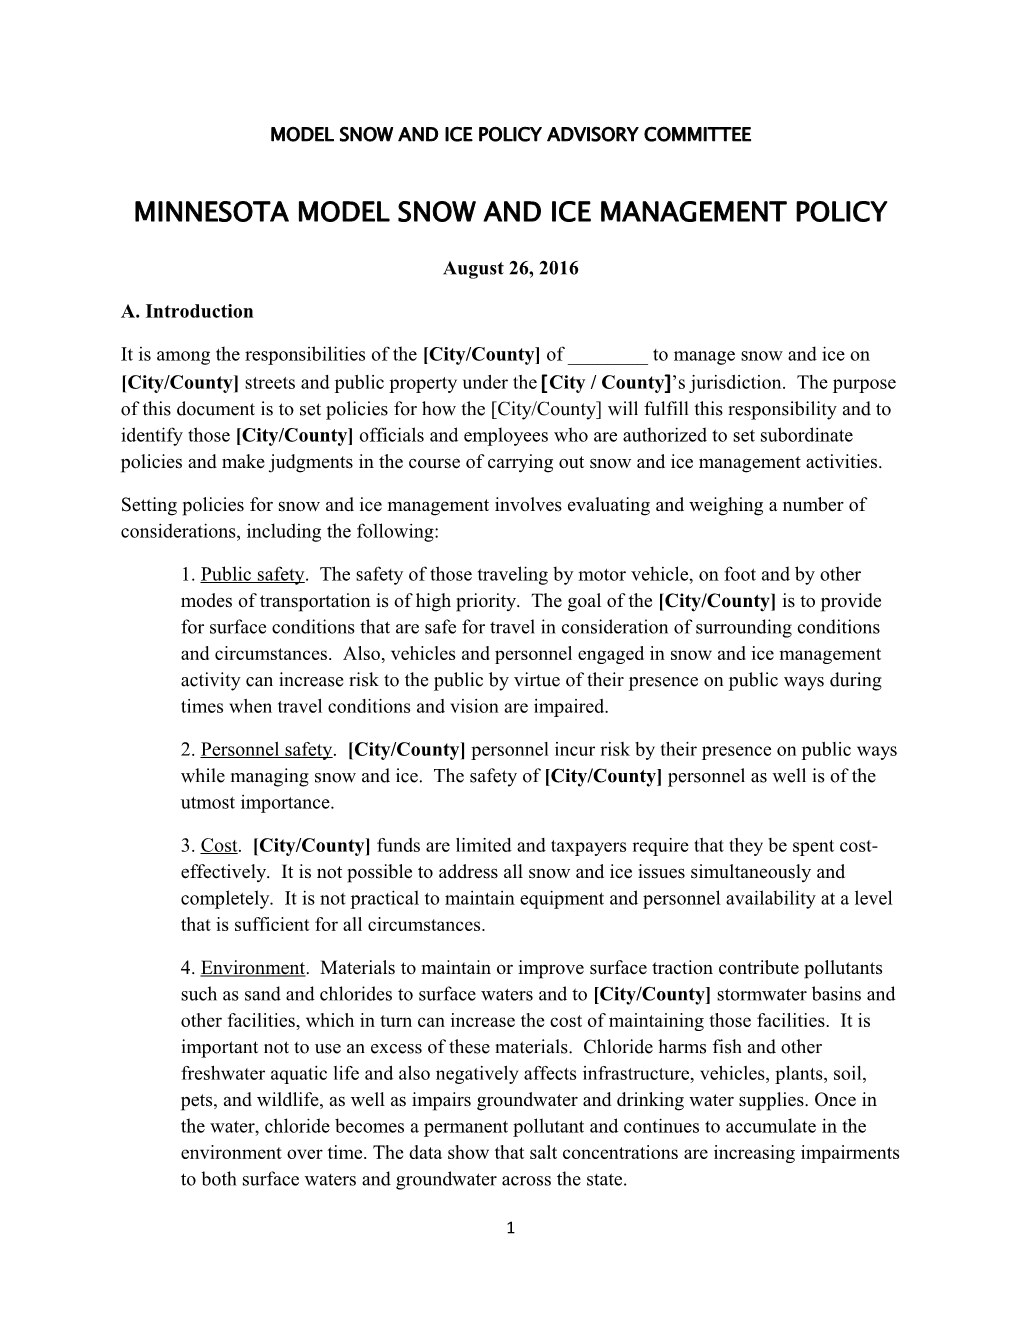 Model Snow and Ice Policy Advisory Committee